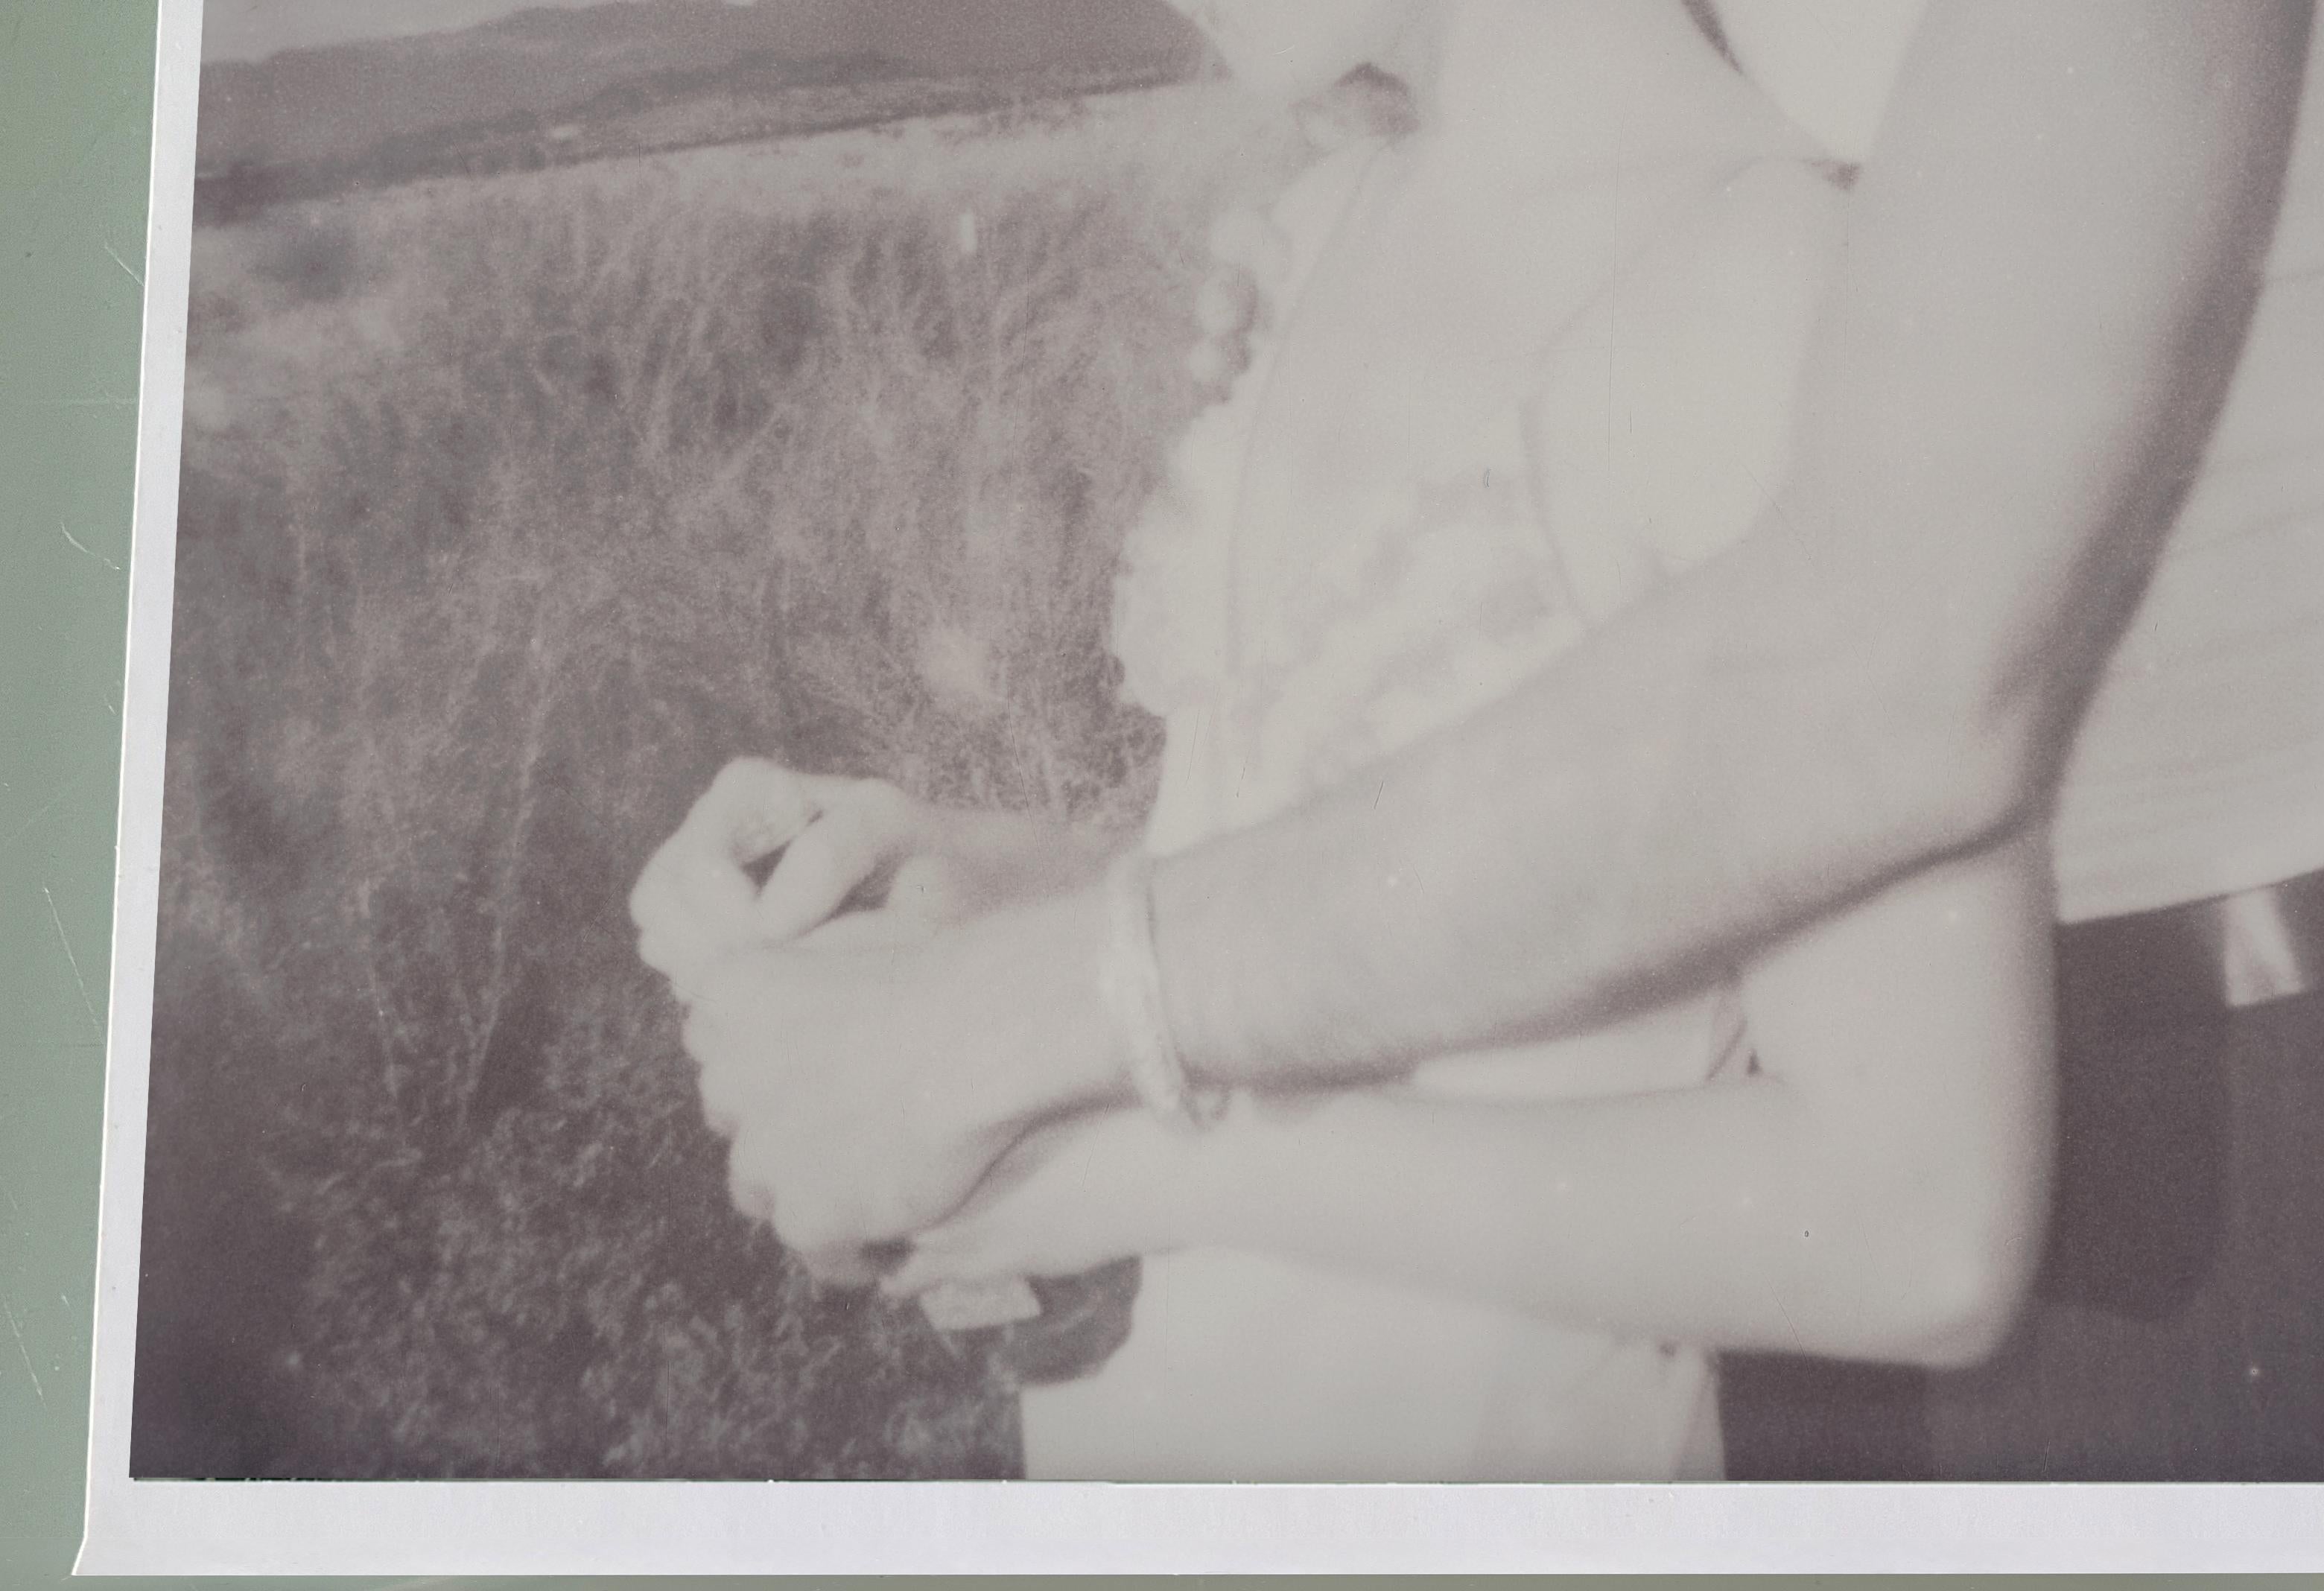 A Man and a Woman (Sidewinder) - Contemporary, Expired Polaroid, Photograph - Gray Landscape Photograph by Stefanie Schneider